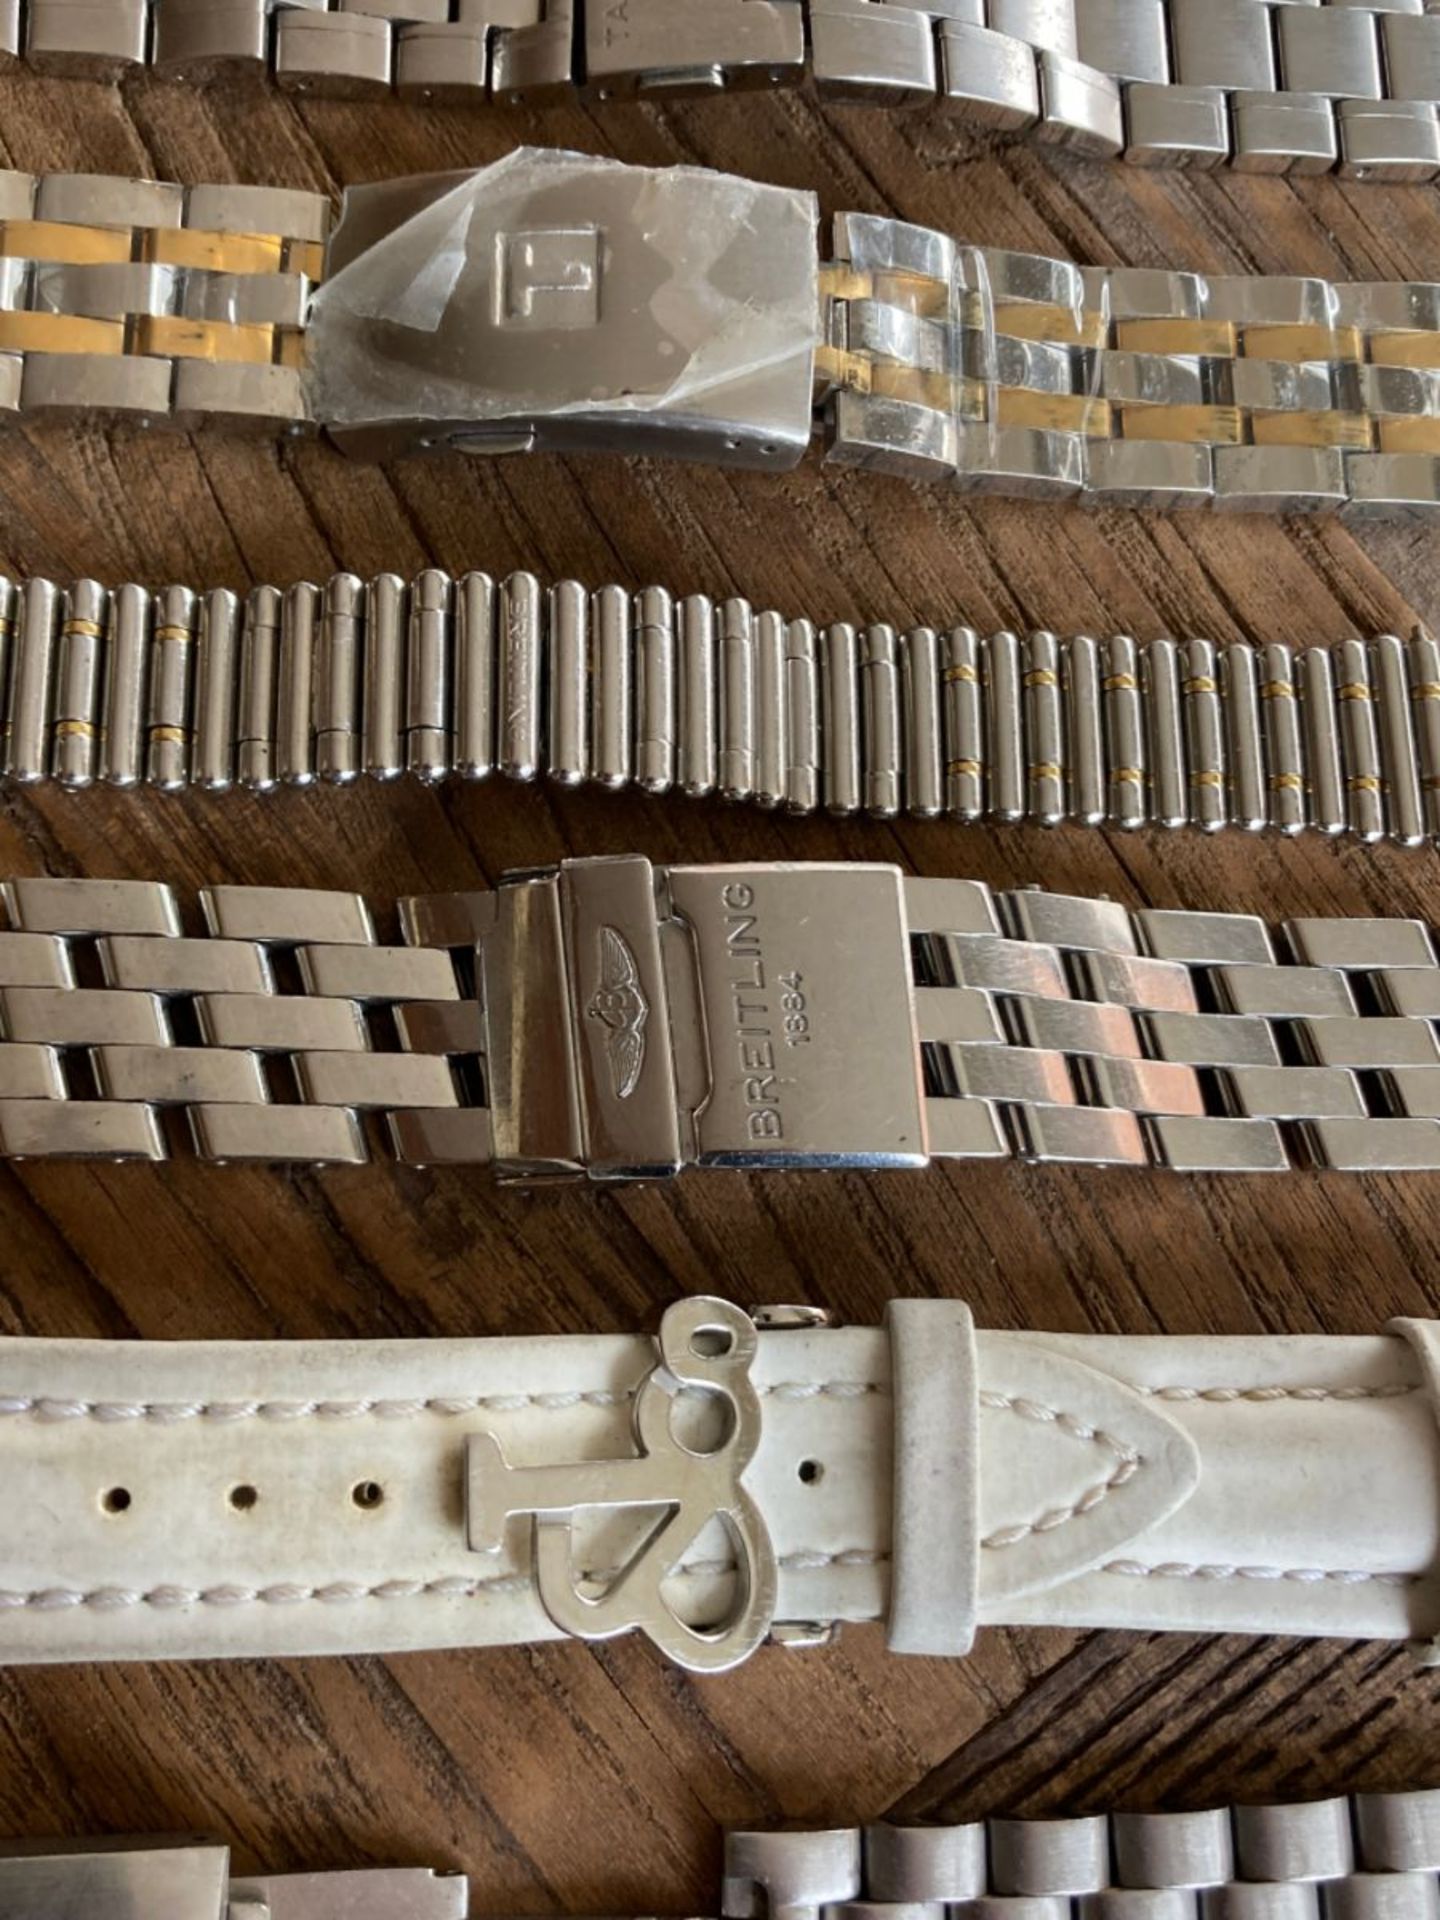 WATCH BRACELETS - BREITLING, OMEGA, JACOB AND CO, TAG HEUER - Image 3 of 3